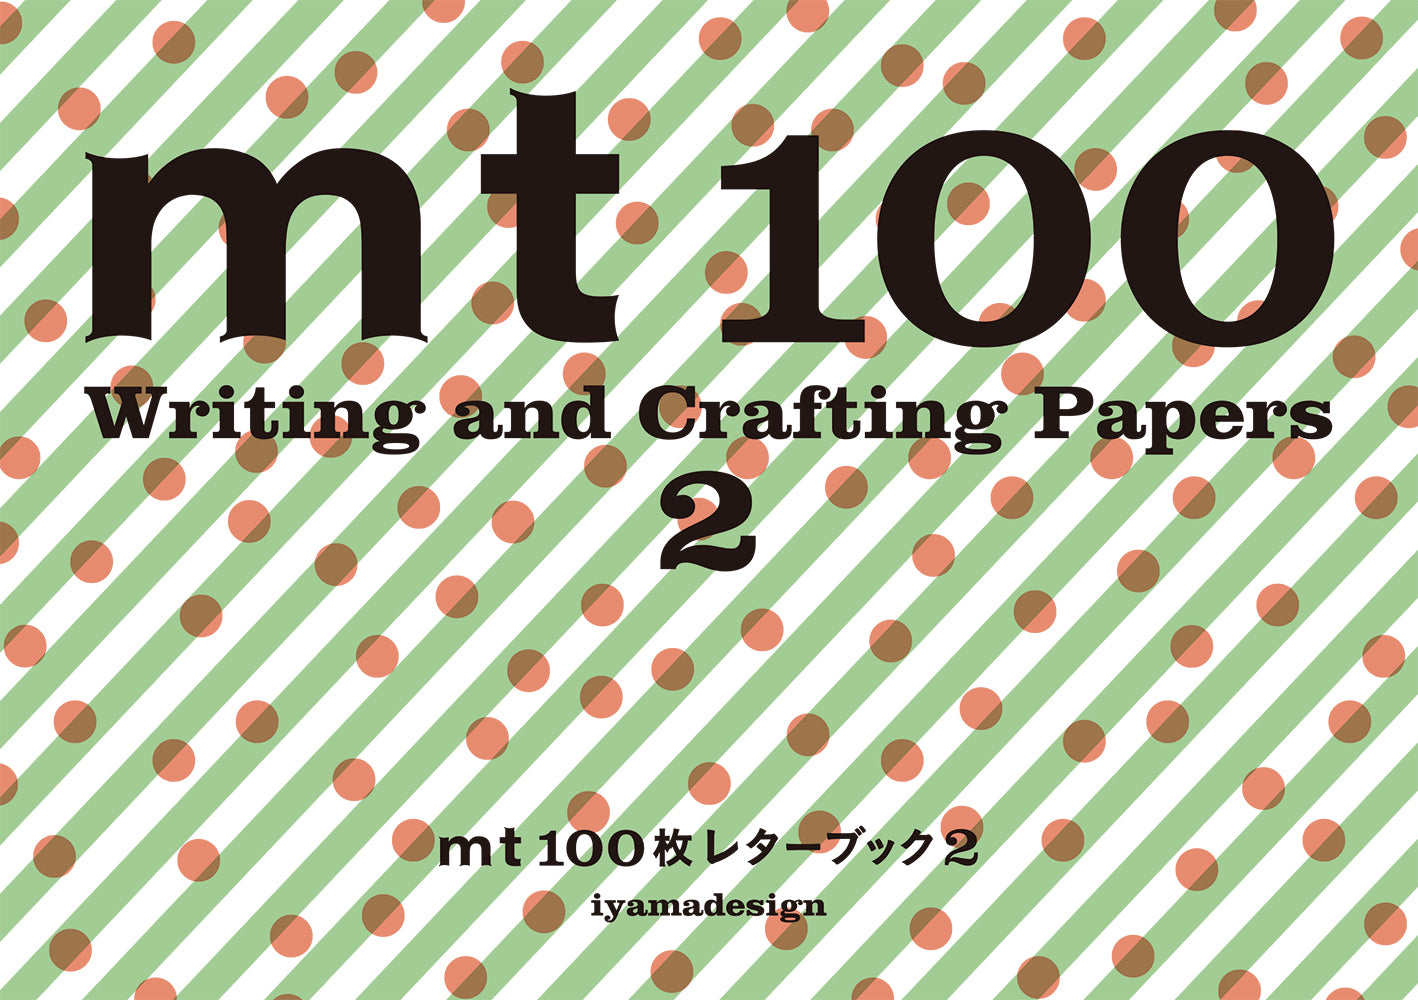 MT 100 Writing and Crafting Papers 2 (Japanese only, mostly visual) cover